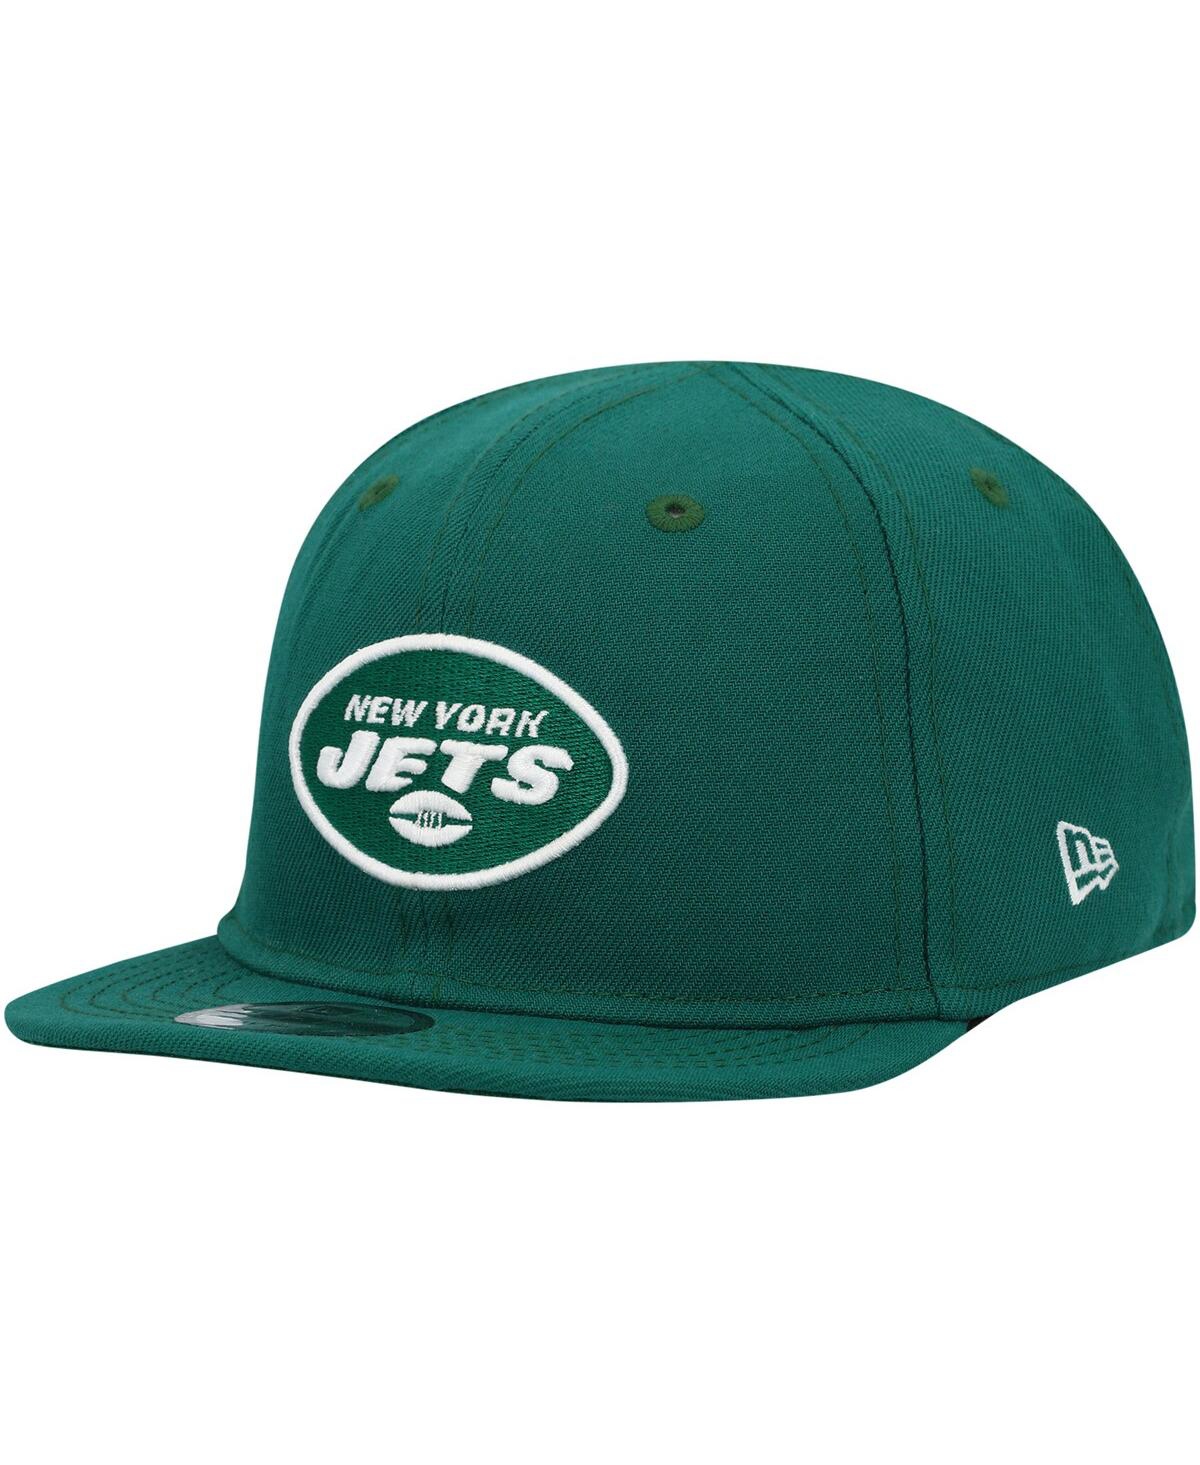 InfantGreen New York Jets My 1st 9Fifty Adjustable Hat - Green